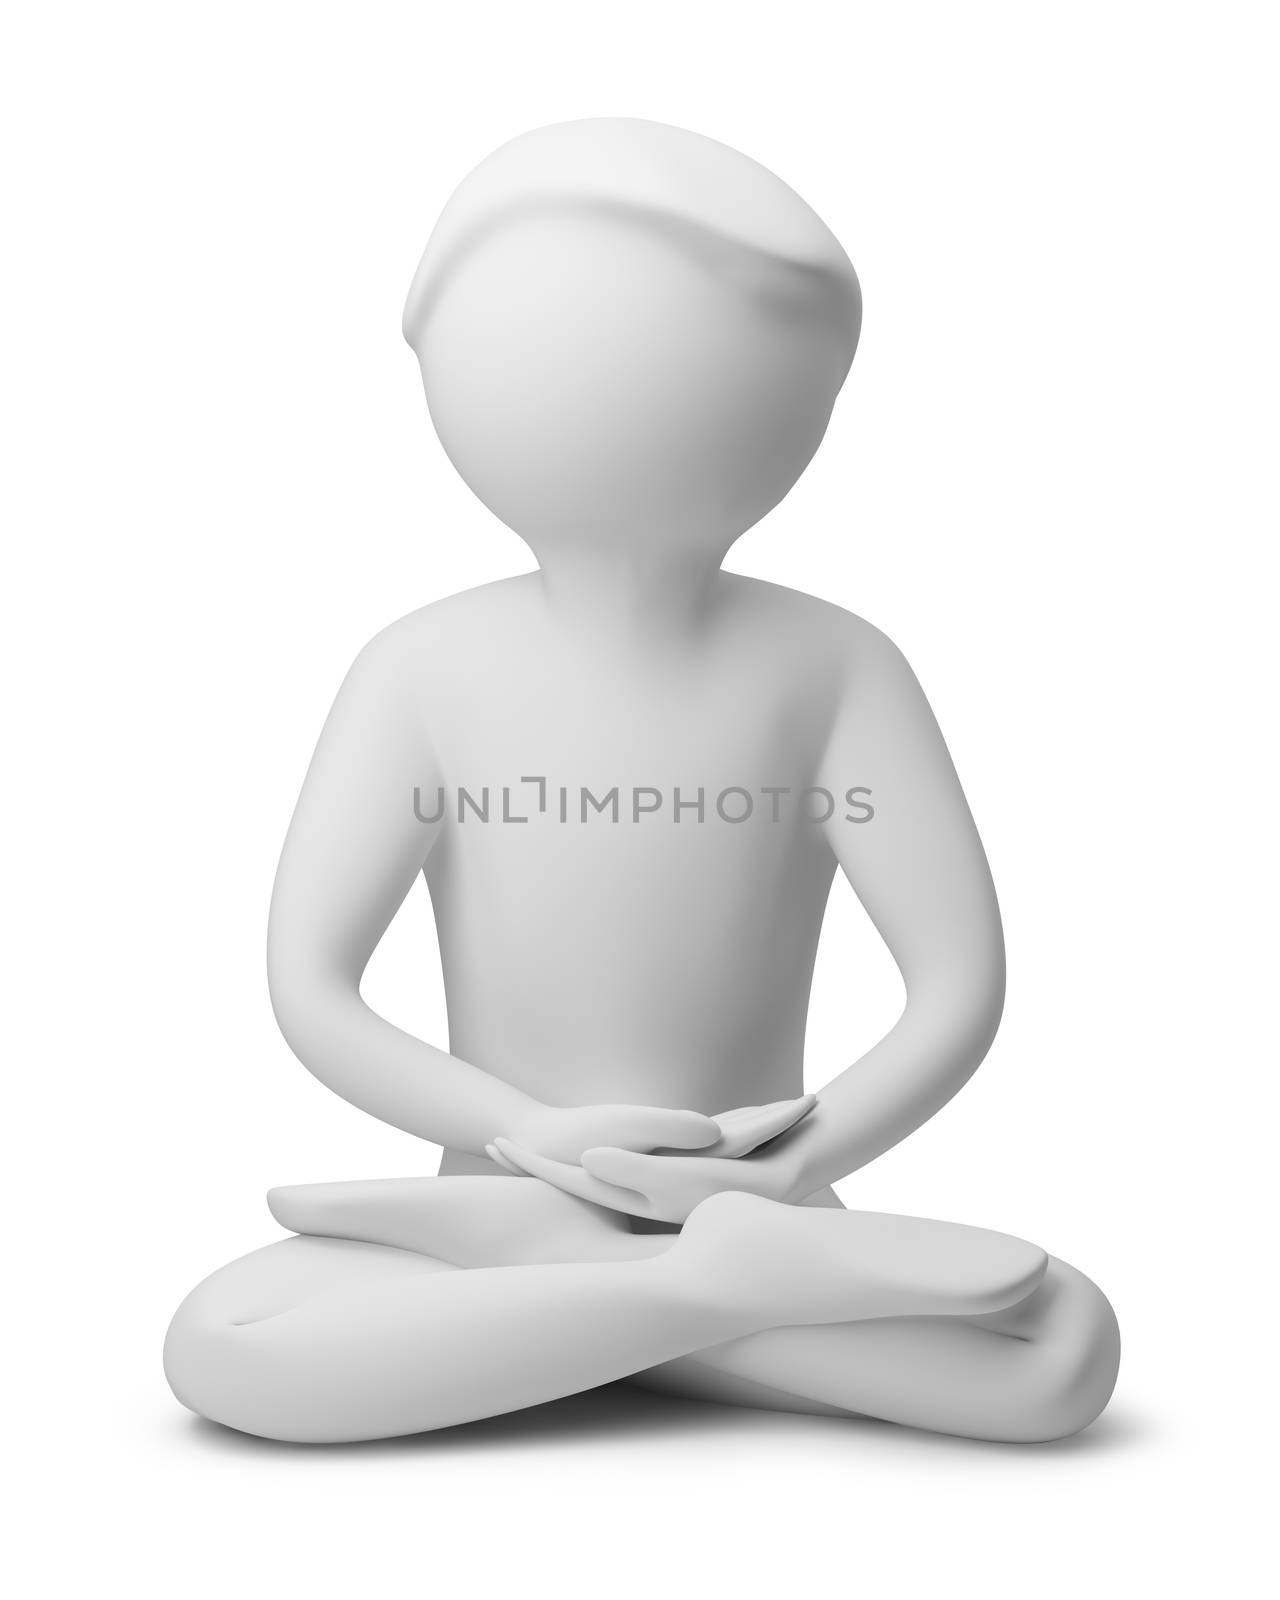 3d the person meditating. 3d image. Isolated background.